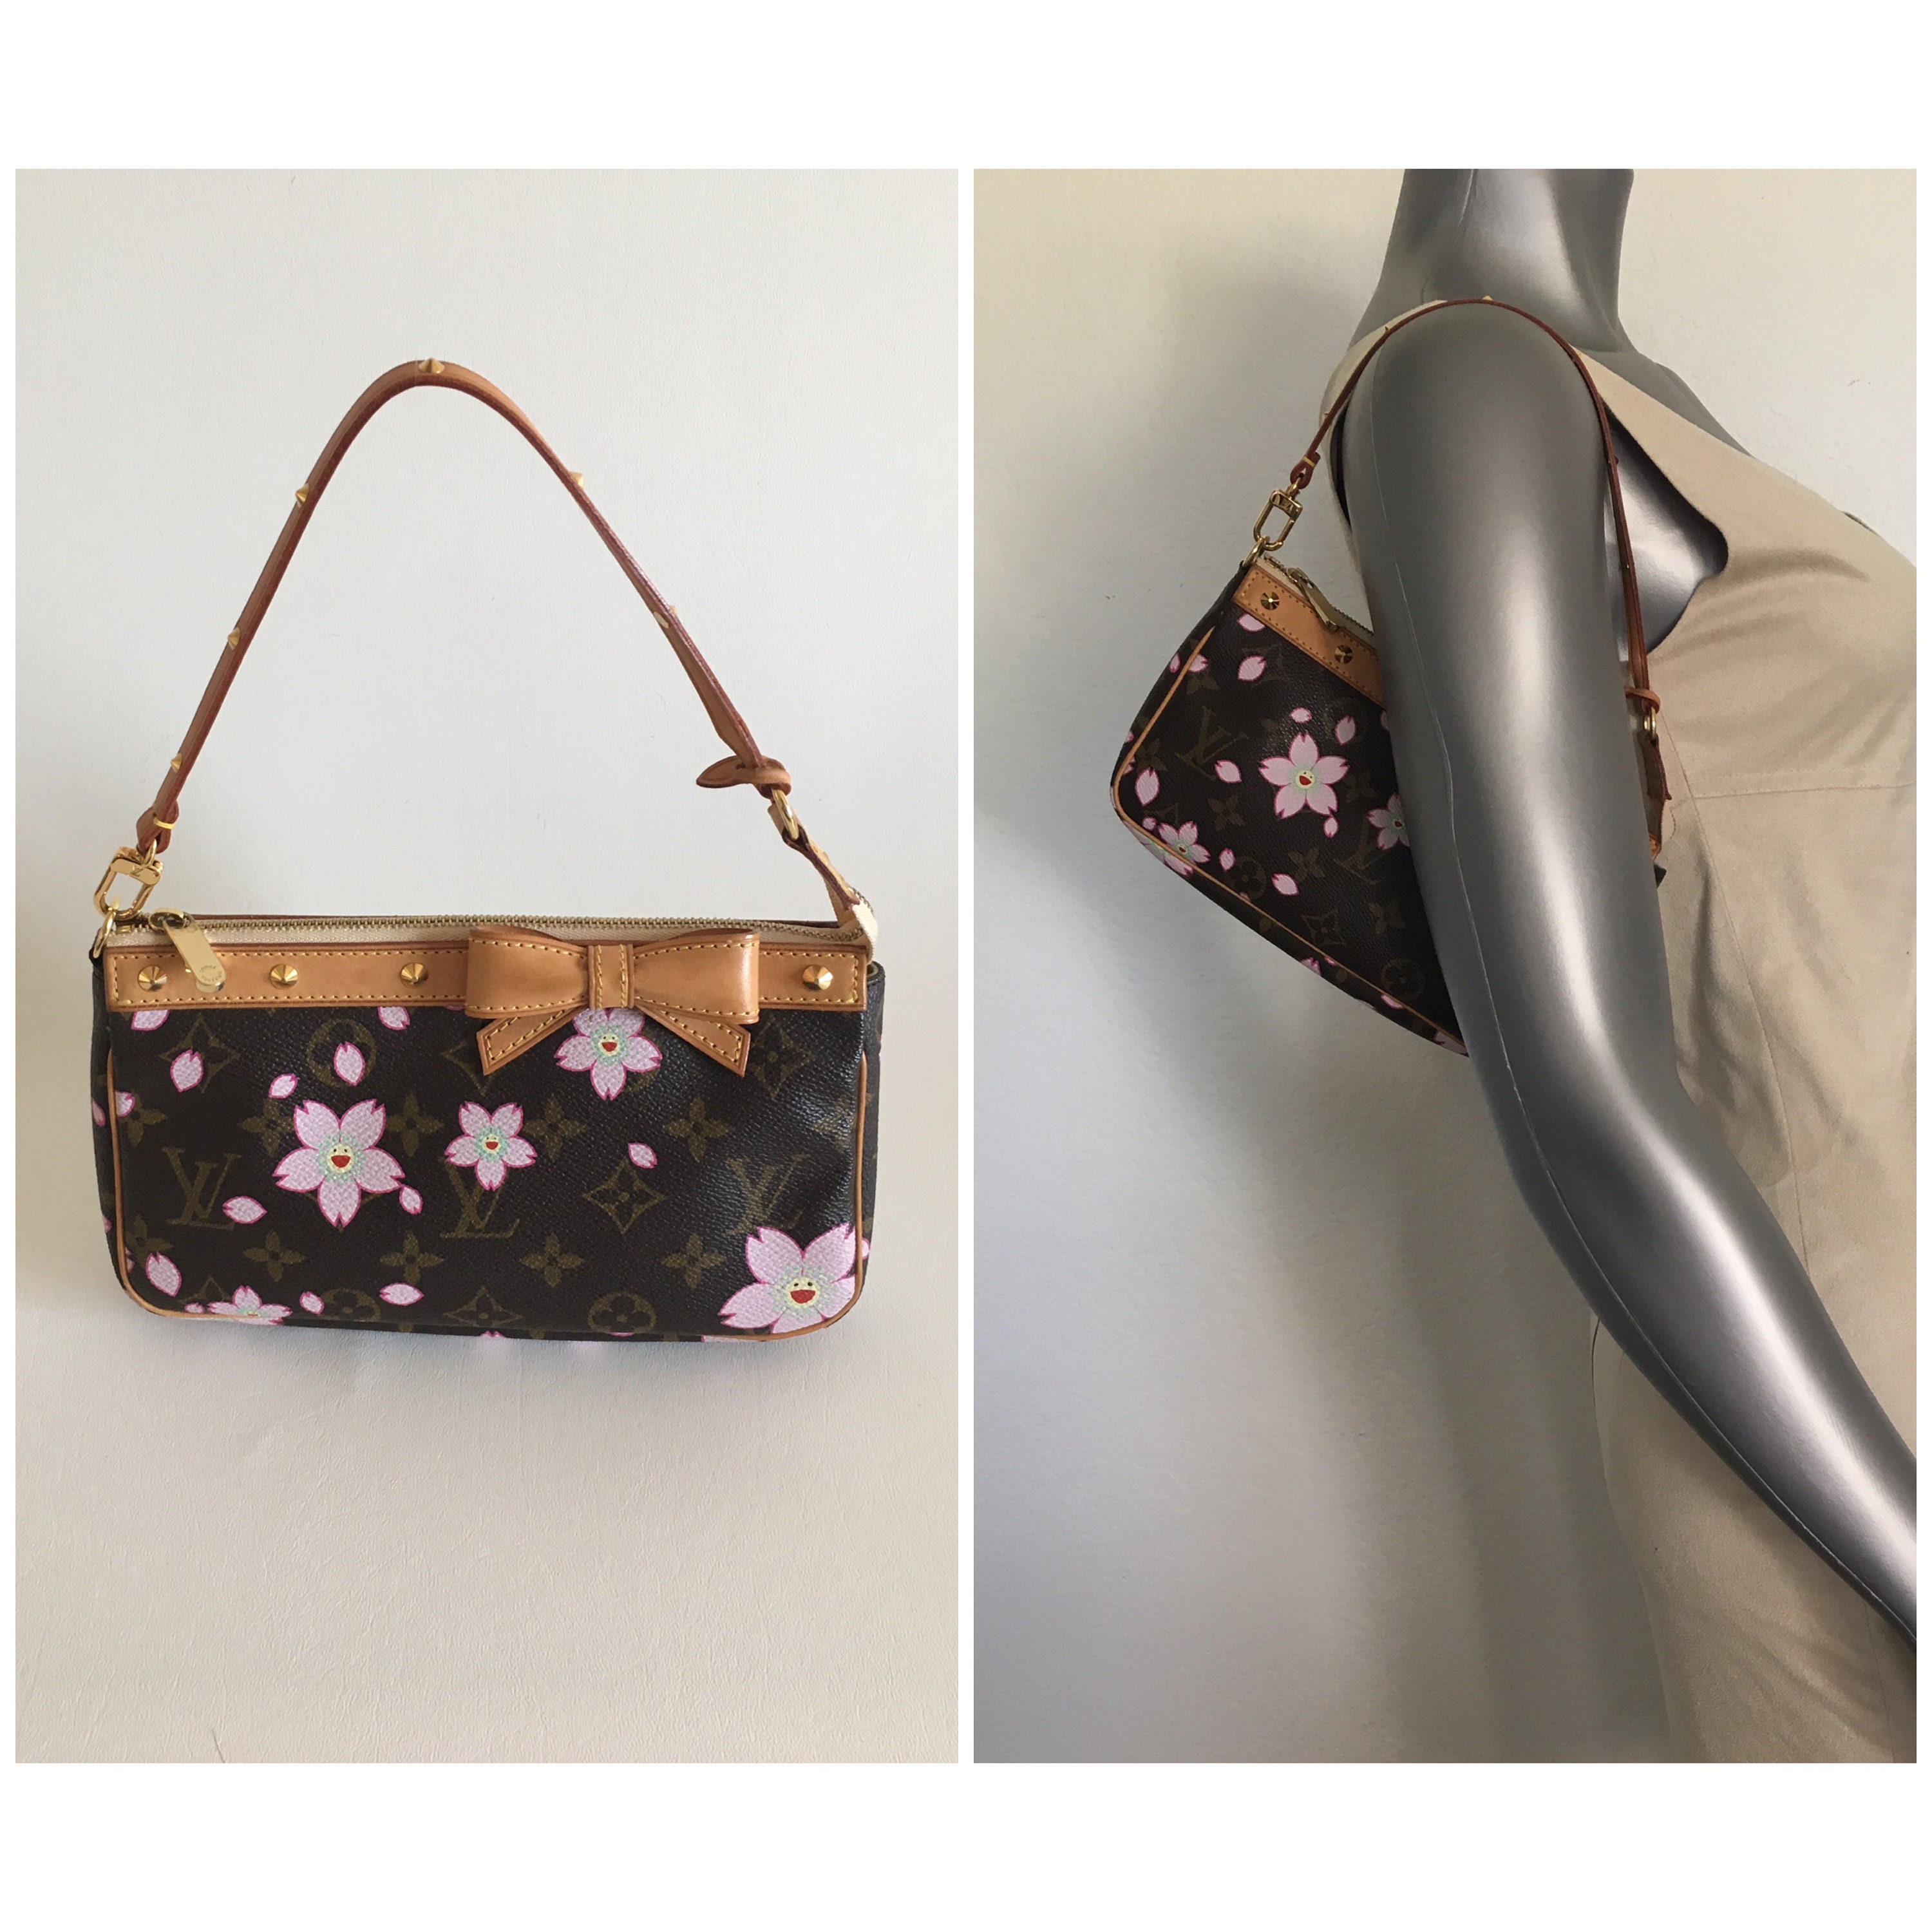 Louis Vuitton cherry blossom purse. I found this at my mother's